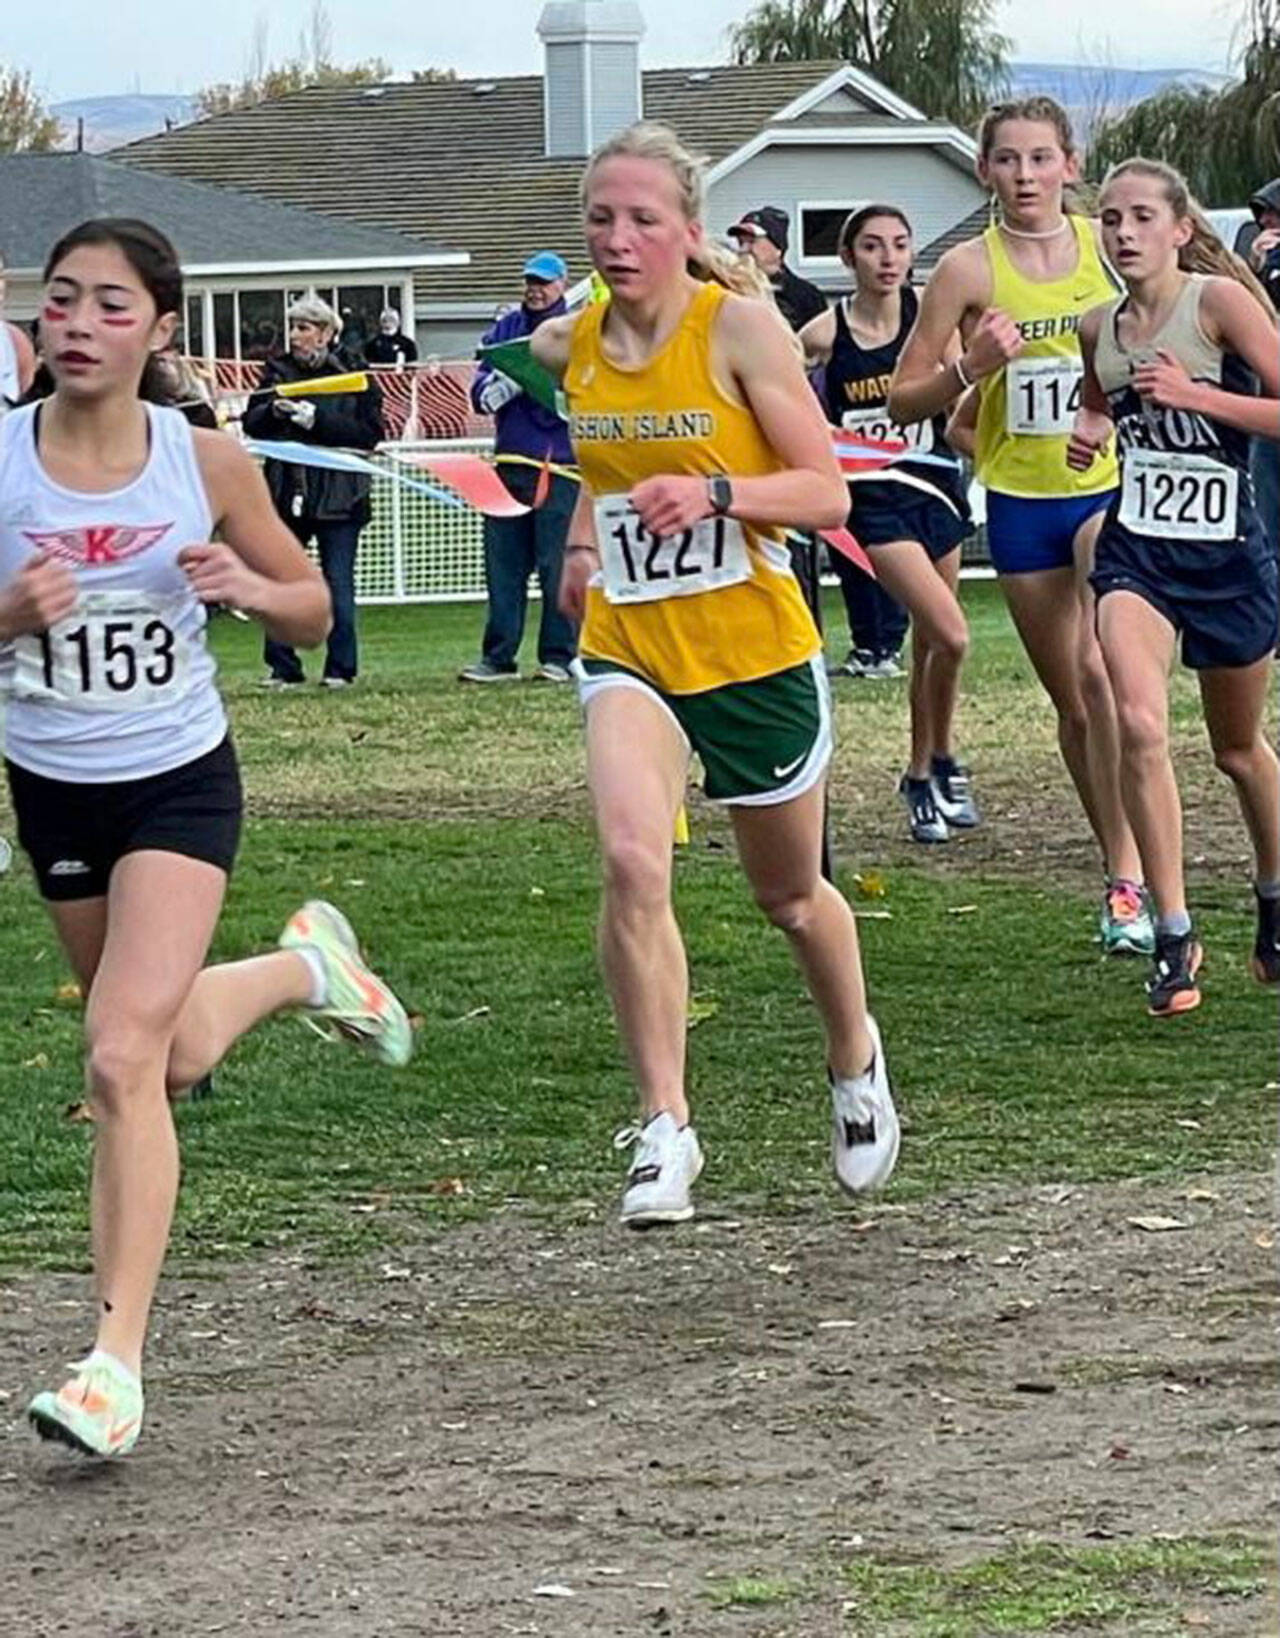 (Lisa Cyra Photo) Madeline Yarkin, at the cross-country state championship race in Pasco.